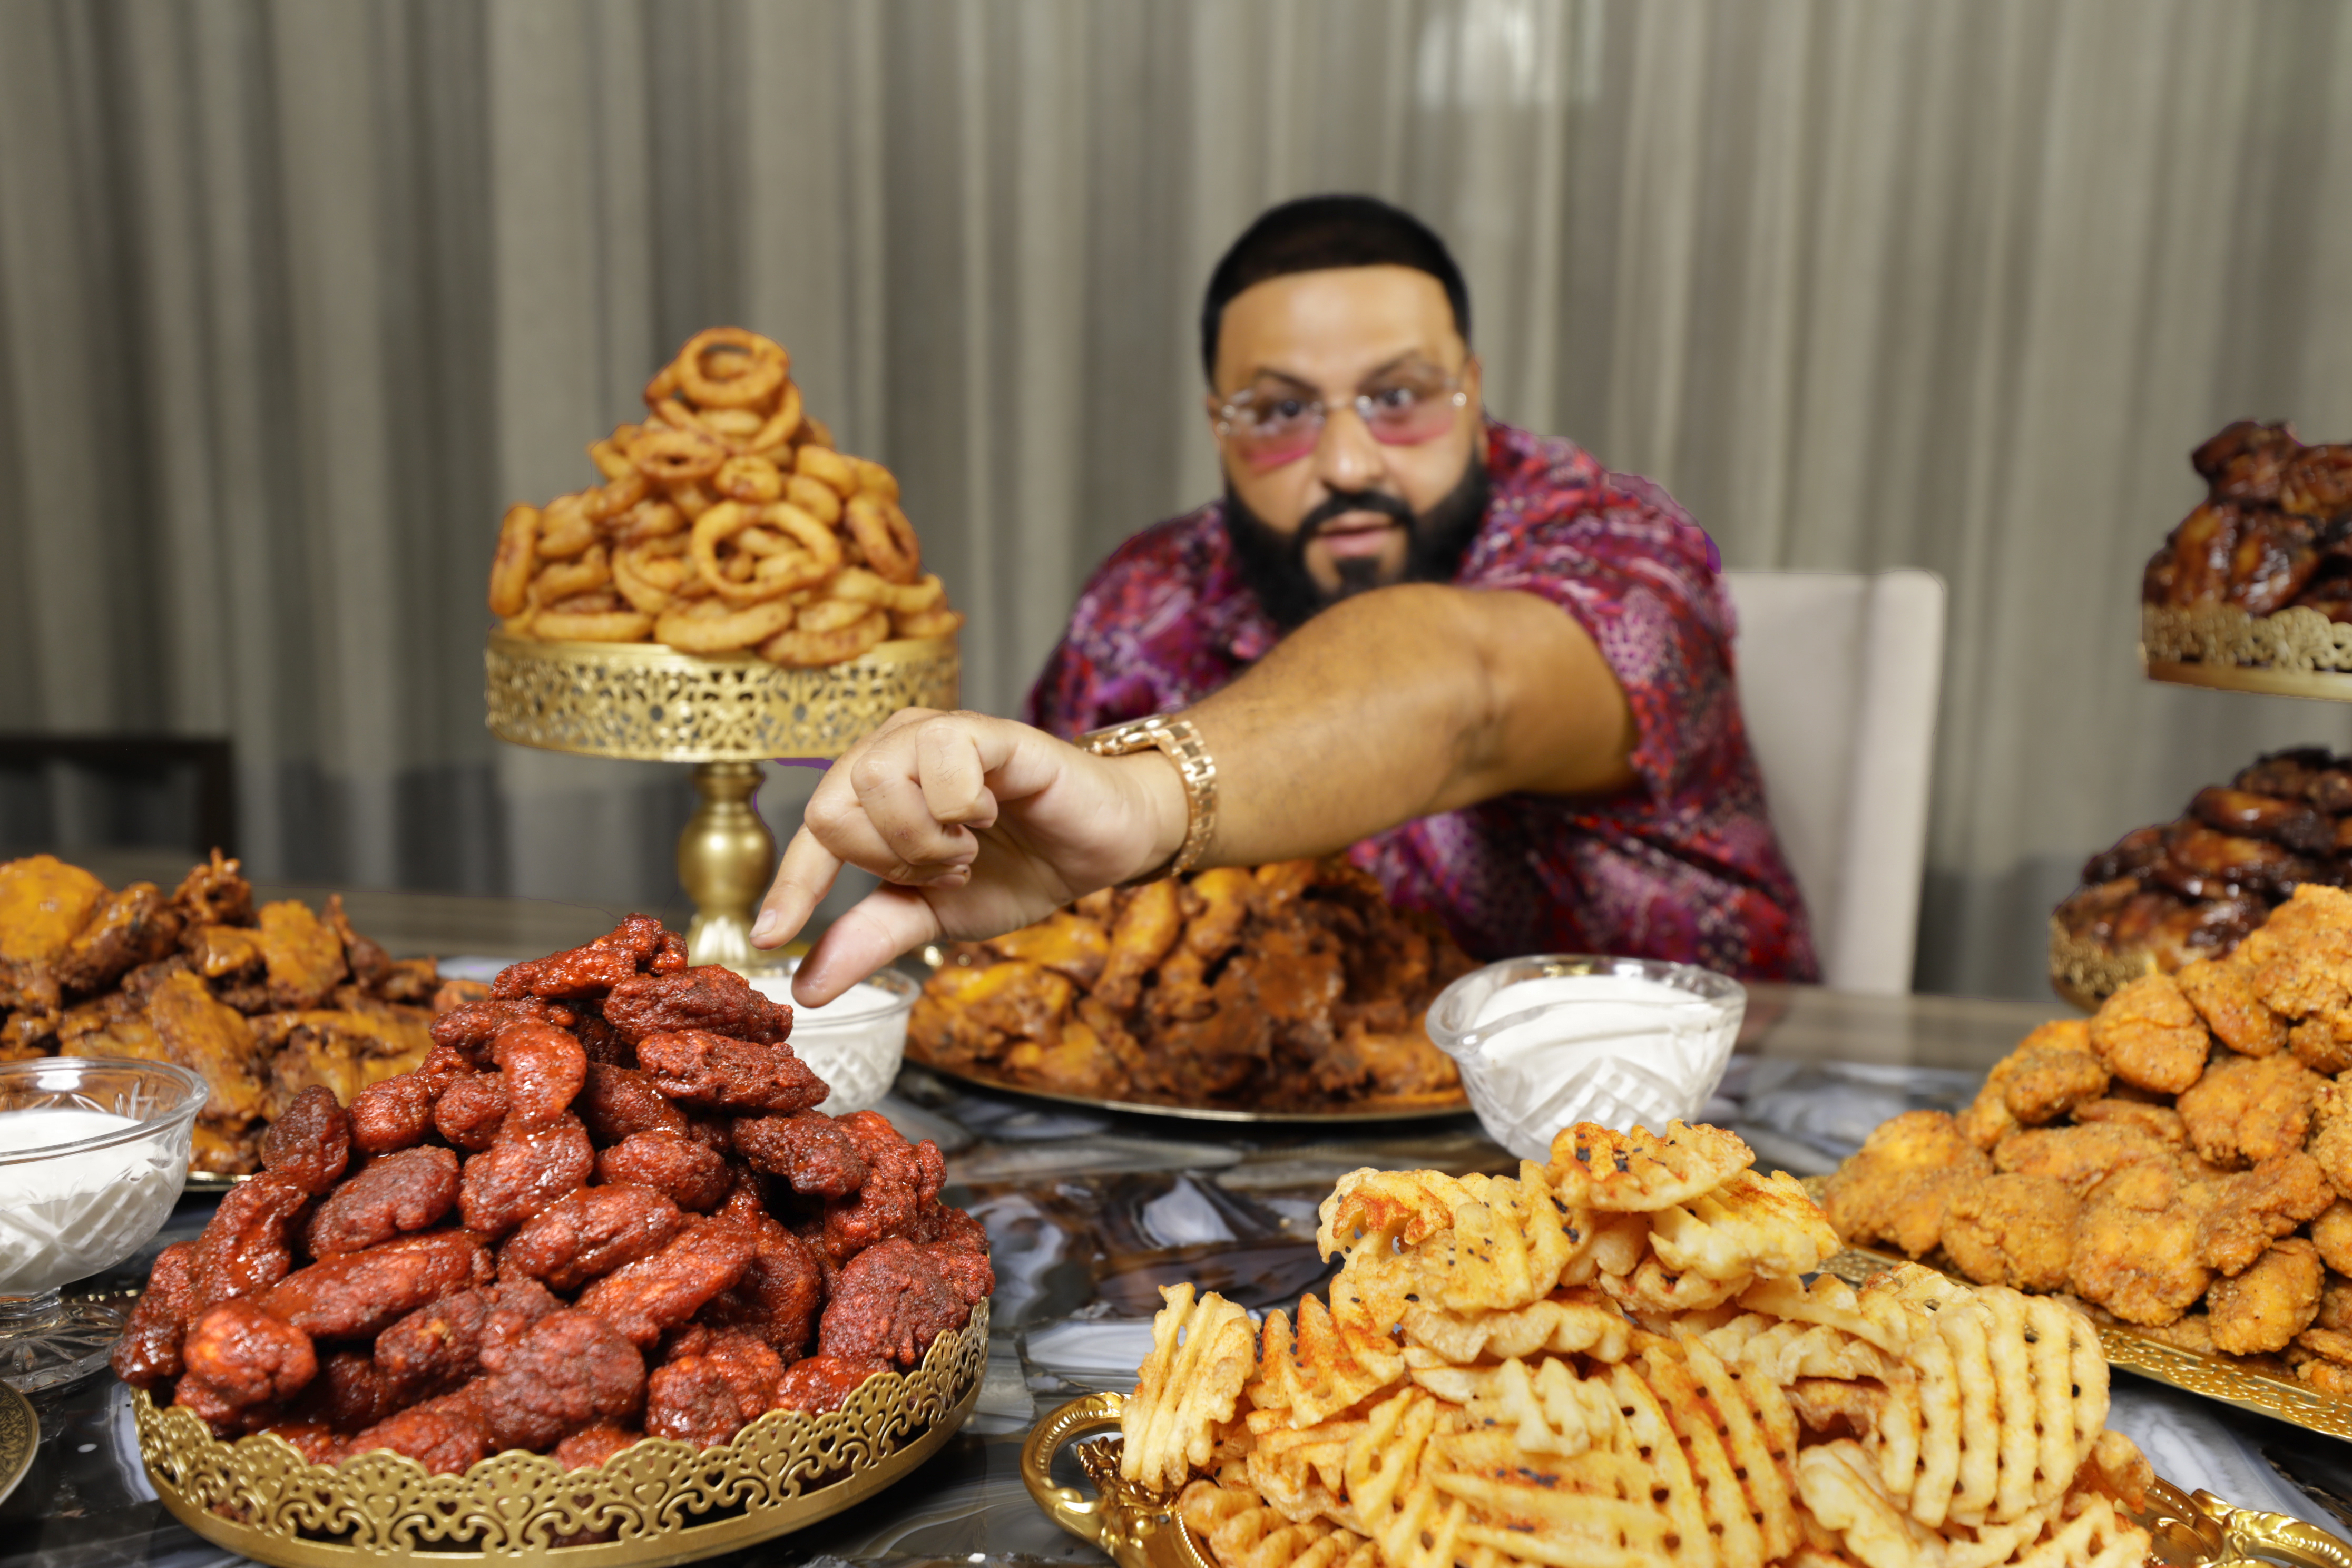 A man wearing sunglasses sitting at a table full of chicken wings, onion rings, and fries.